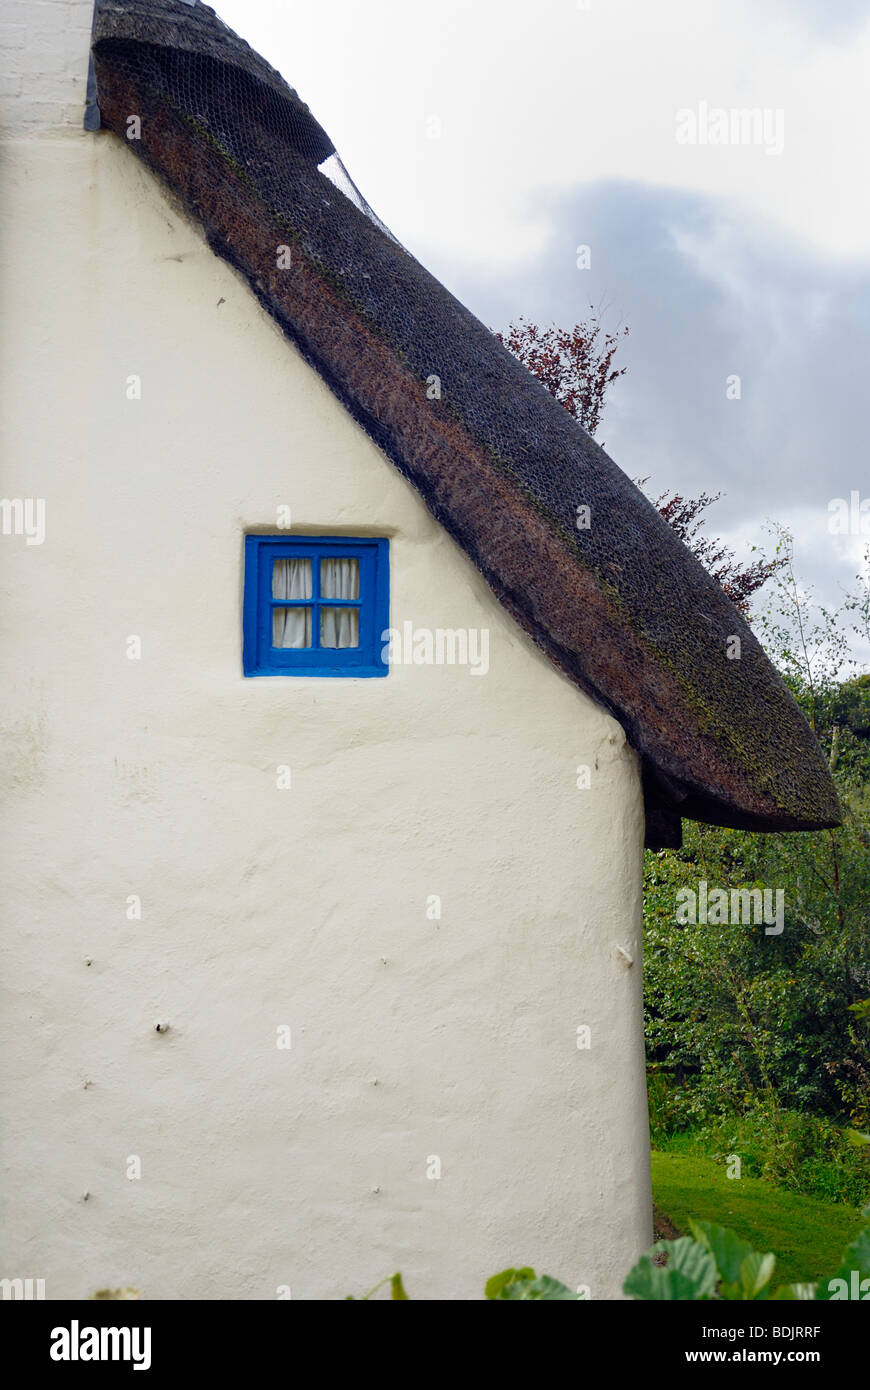 The end of an old thatched cottage with a small blue window Stock Photo